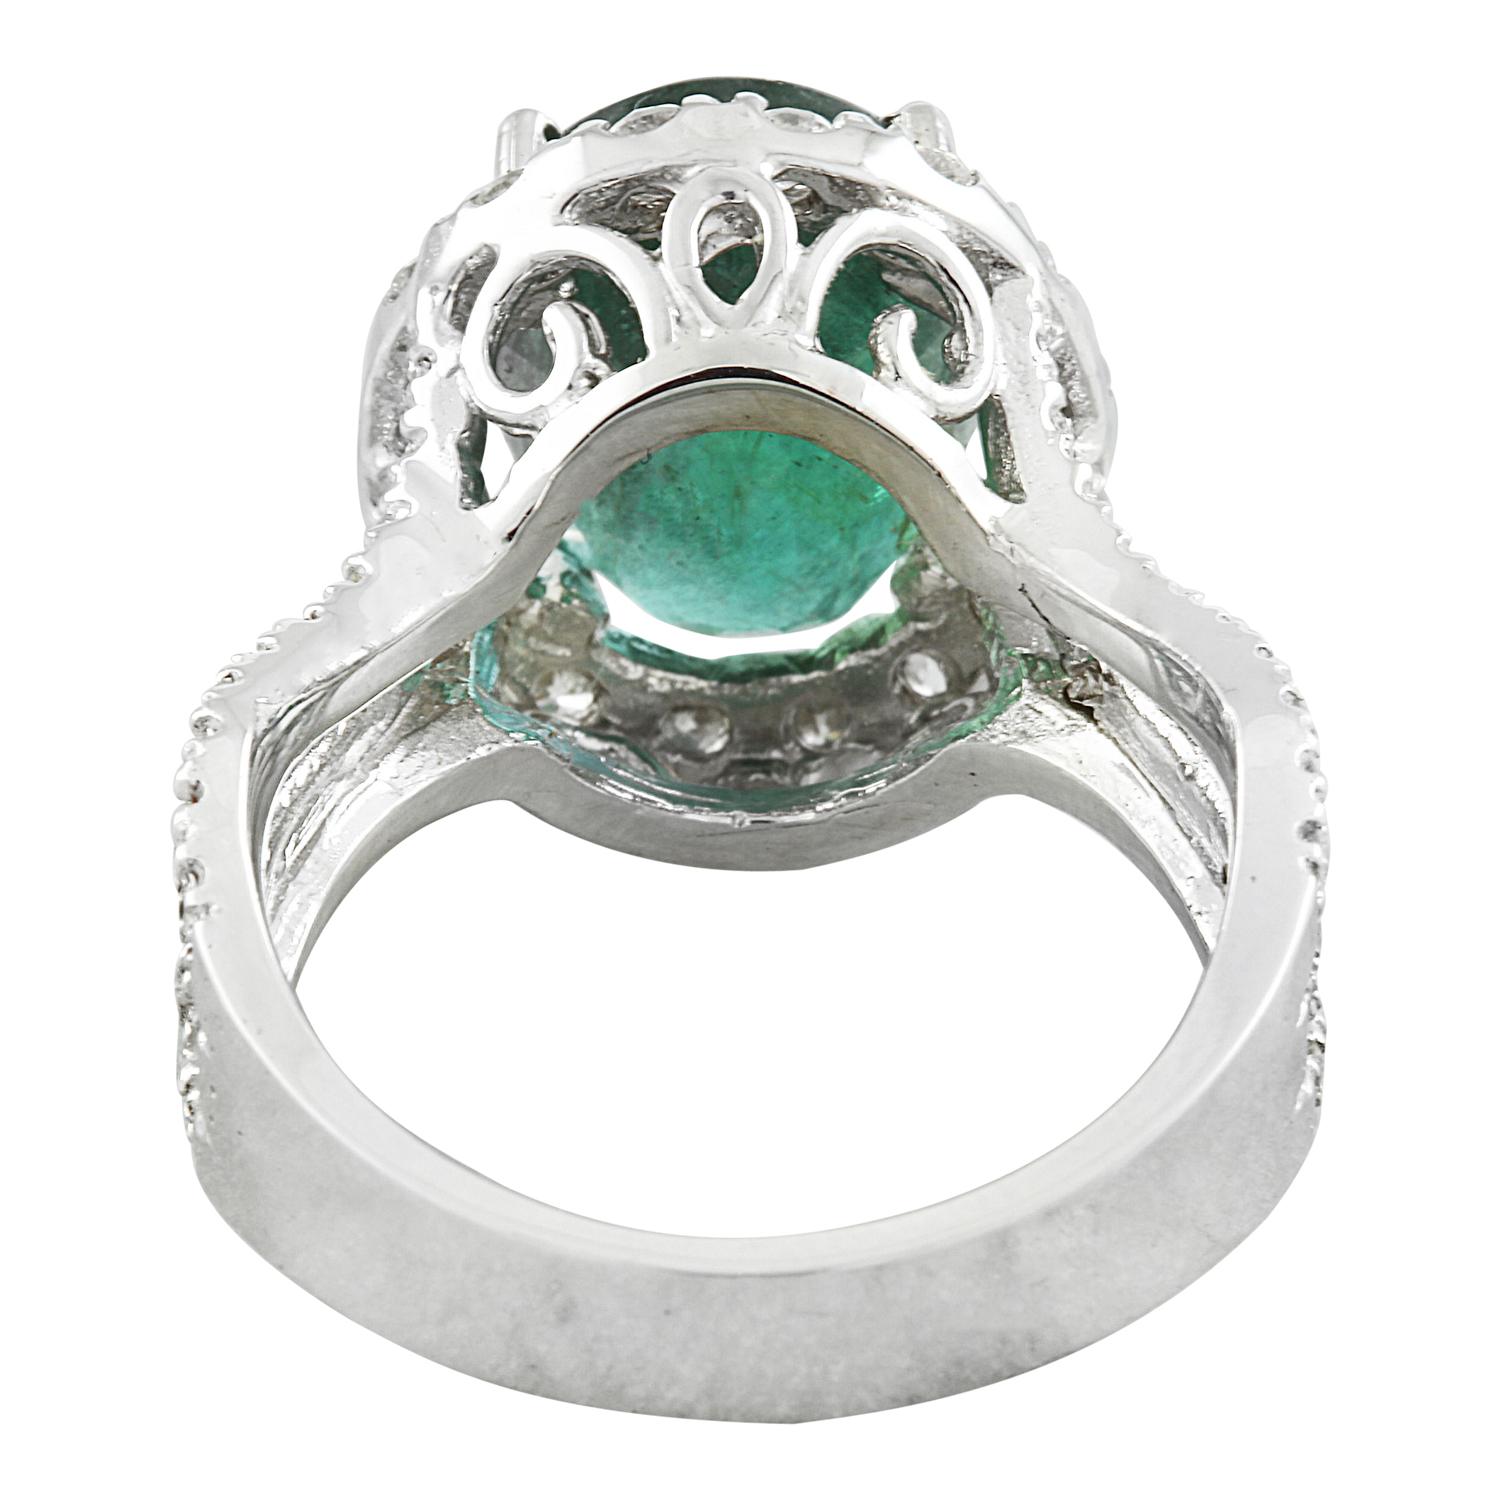 Oval Cut Emerald Elegance: Natural Emerald Diamond Ring in 14K White Gold For Sale